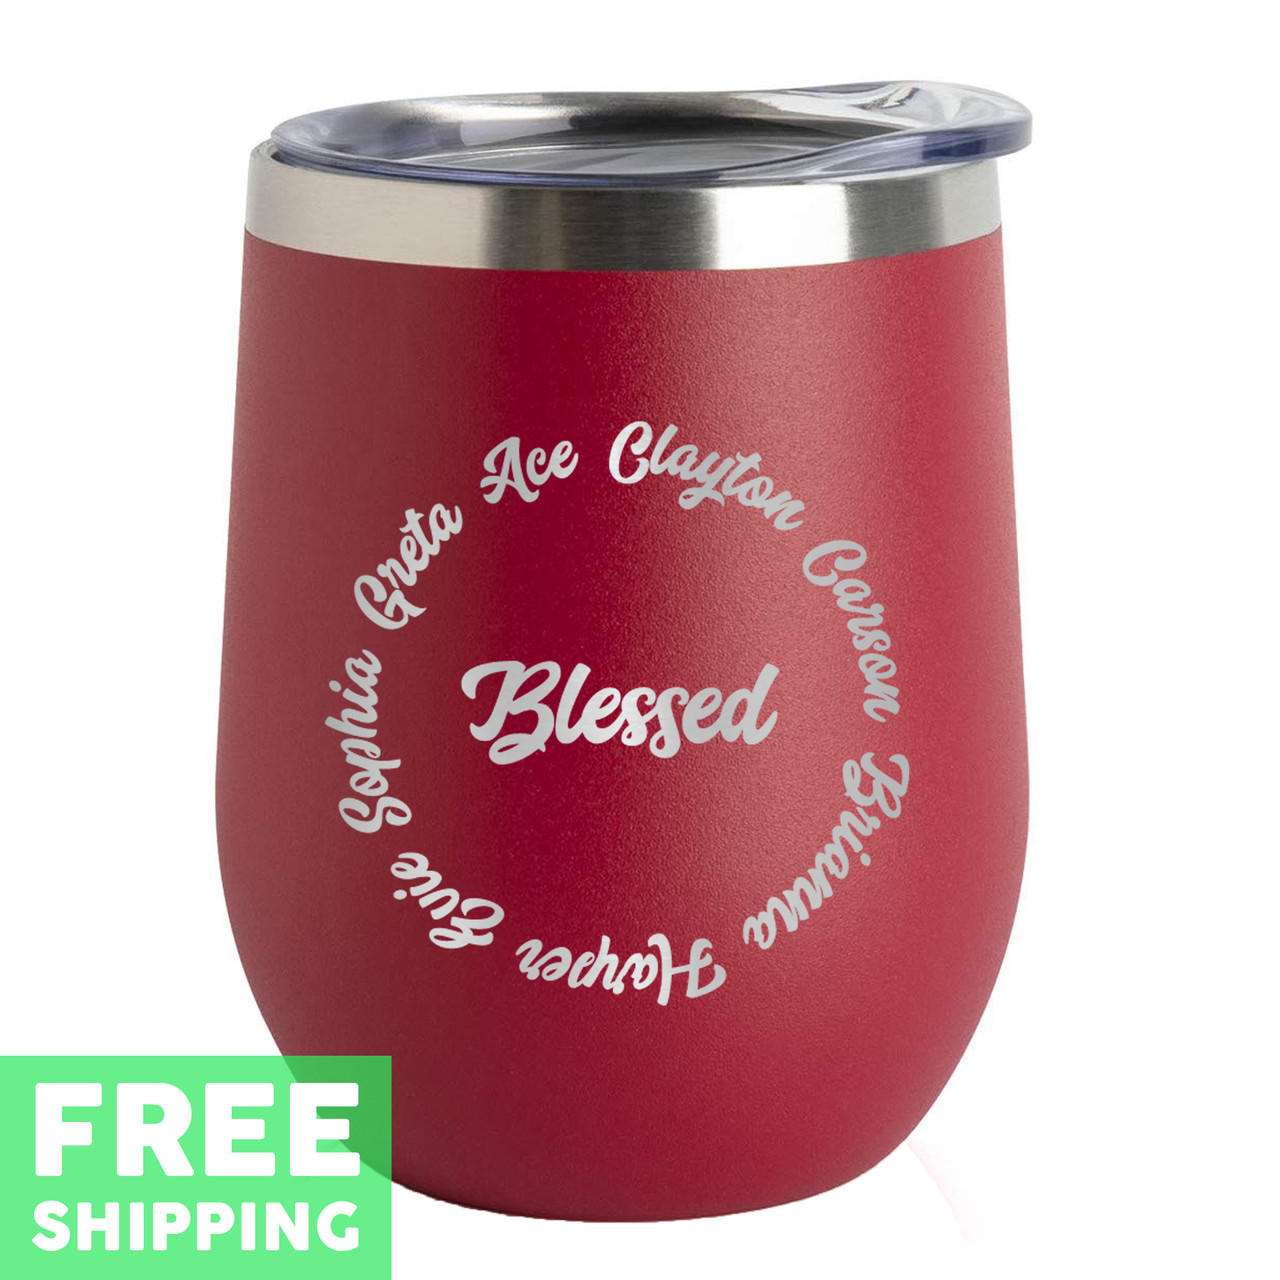 https://cdn11.bigcommerce.com/s-pza6oiin/images/stencil/1280x1280/products/9811/17189/customnamesblessed_12_OZ_Stainless_Steel_Wine_Tumbler_with_Lid_red_3421_freeshipping__72241.1586536038.jpg?c=2?imbypass=on